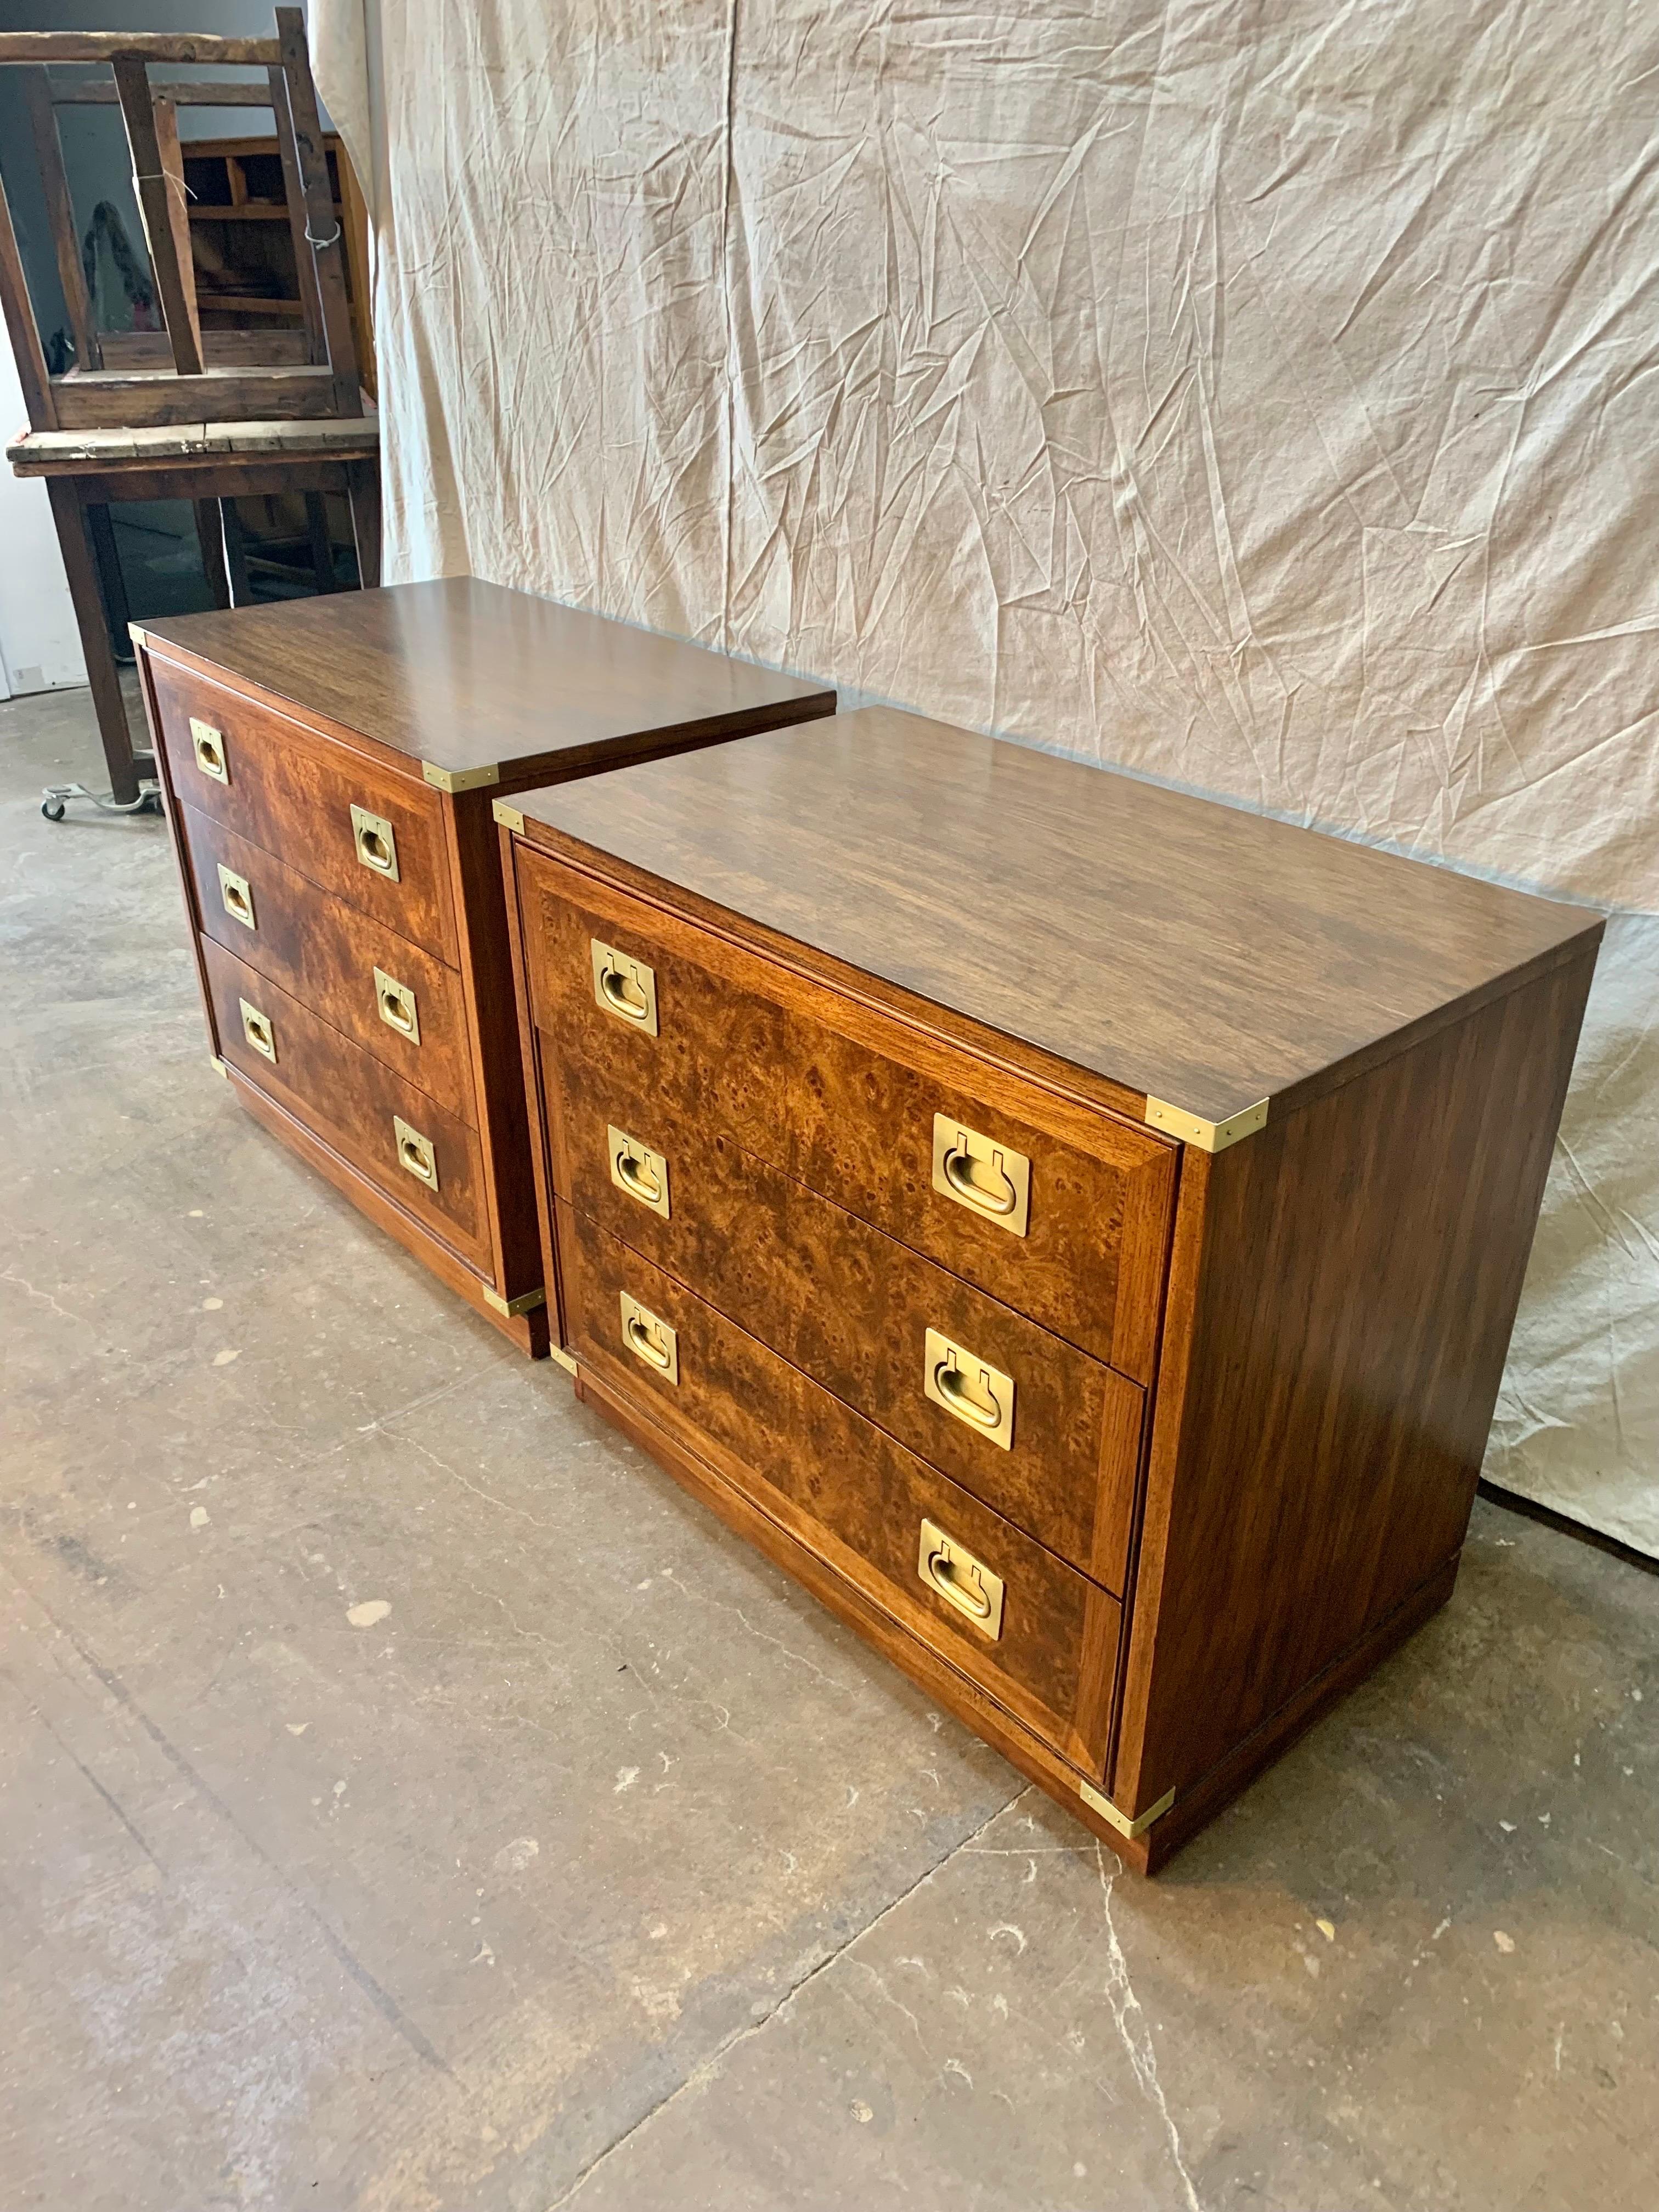 20th Century Mid 20th C. Walnut, Burlwood and Brass Campaign Style Bachelor Chests - a Pair